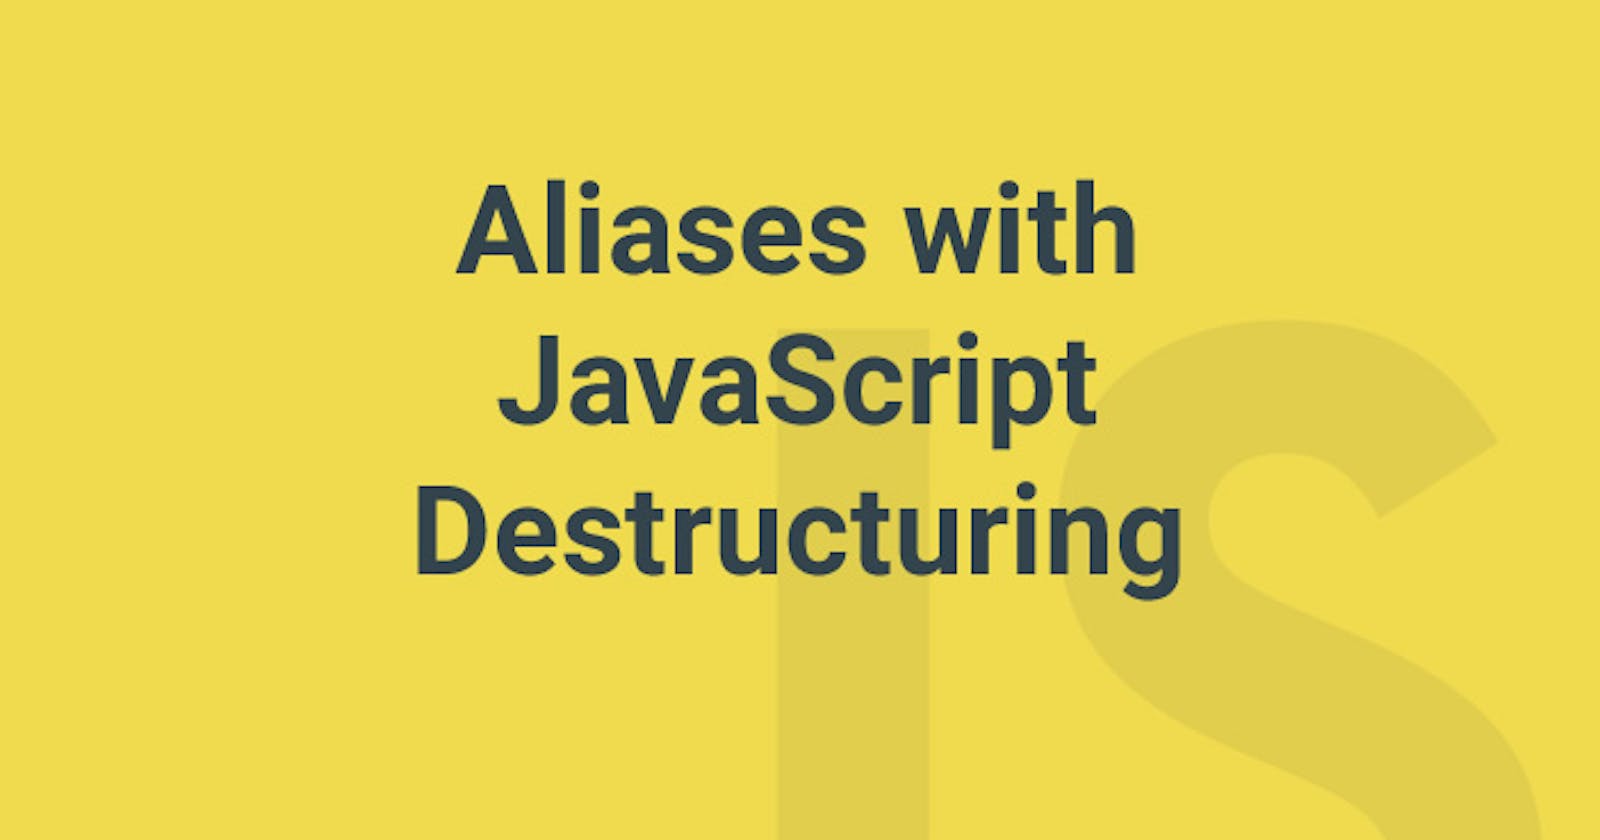 Destructuring with an alias